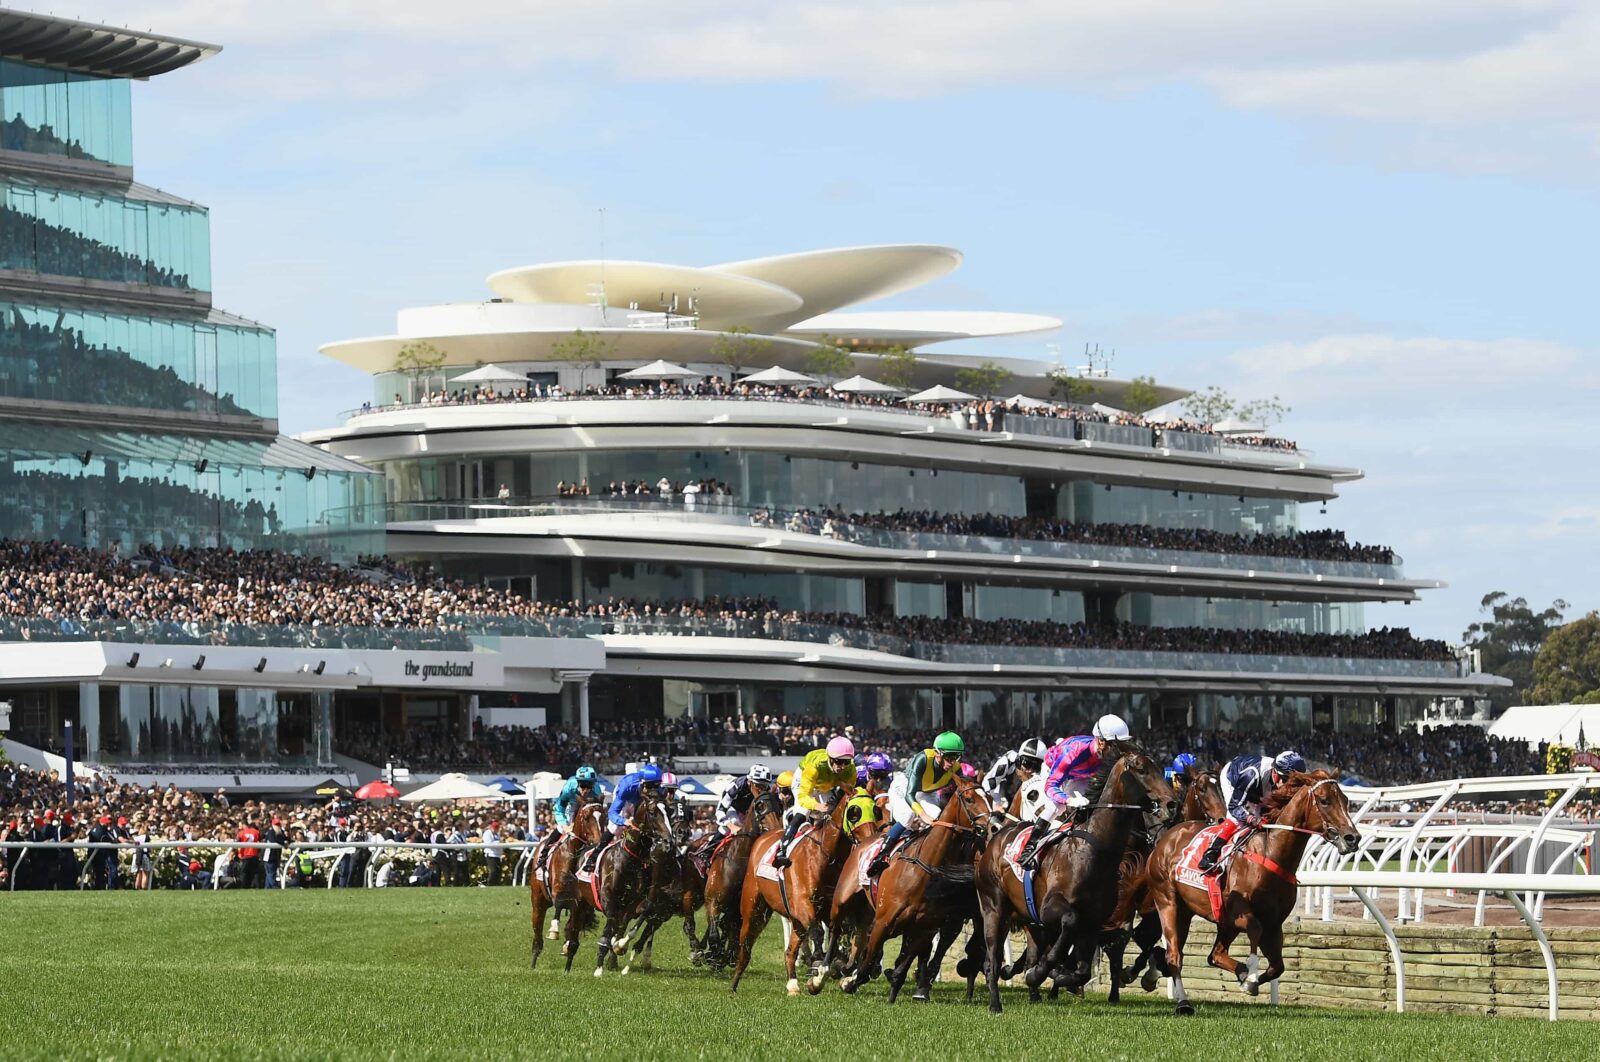 Horses racing at Flemington Raceourse during the 2018 Melbourne Cup Carnival